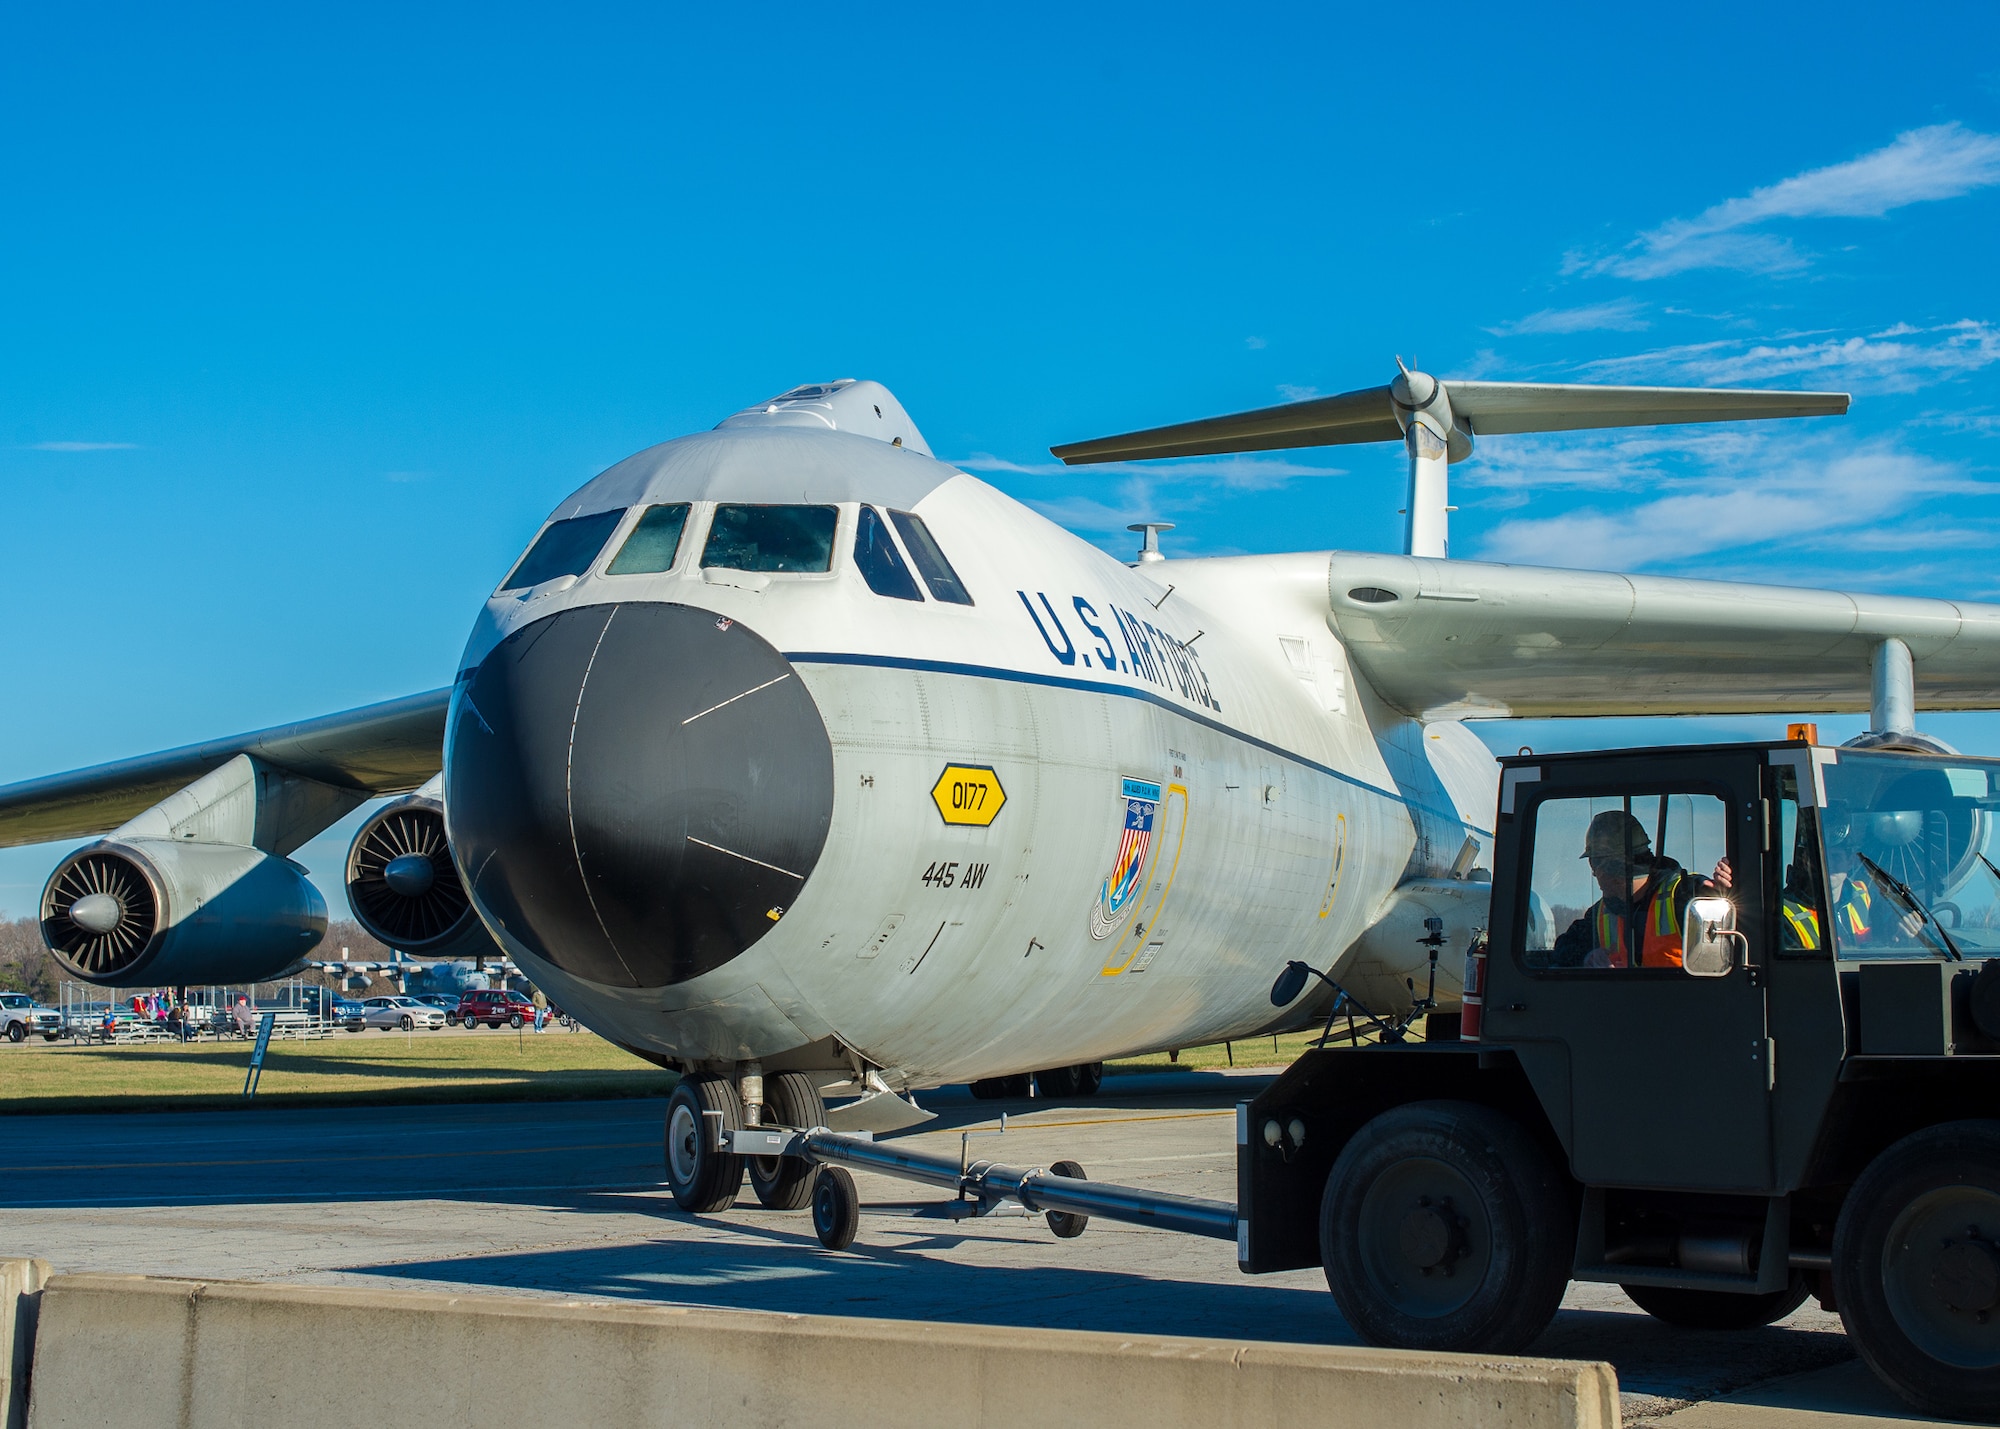 Restoration staff move the Lockheed C-141C Hanoi Taxi into the new fourth building at the National Museum of the U.S. Air Force on Dec. 16, 2015. (U.S. Air Force photo by Jim Copes)